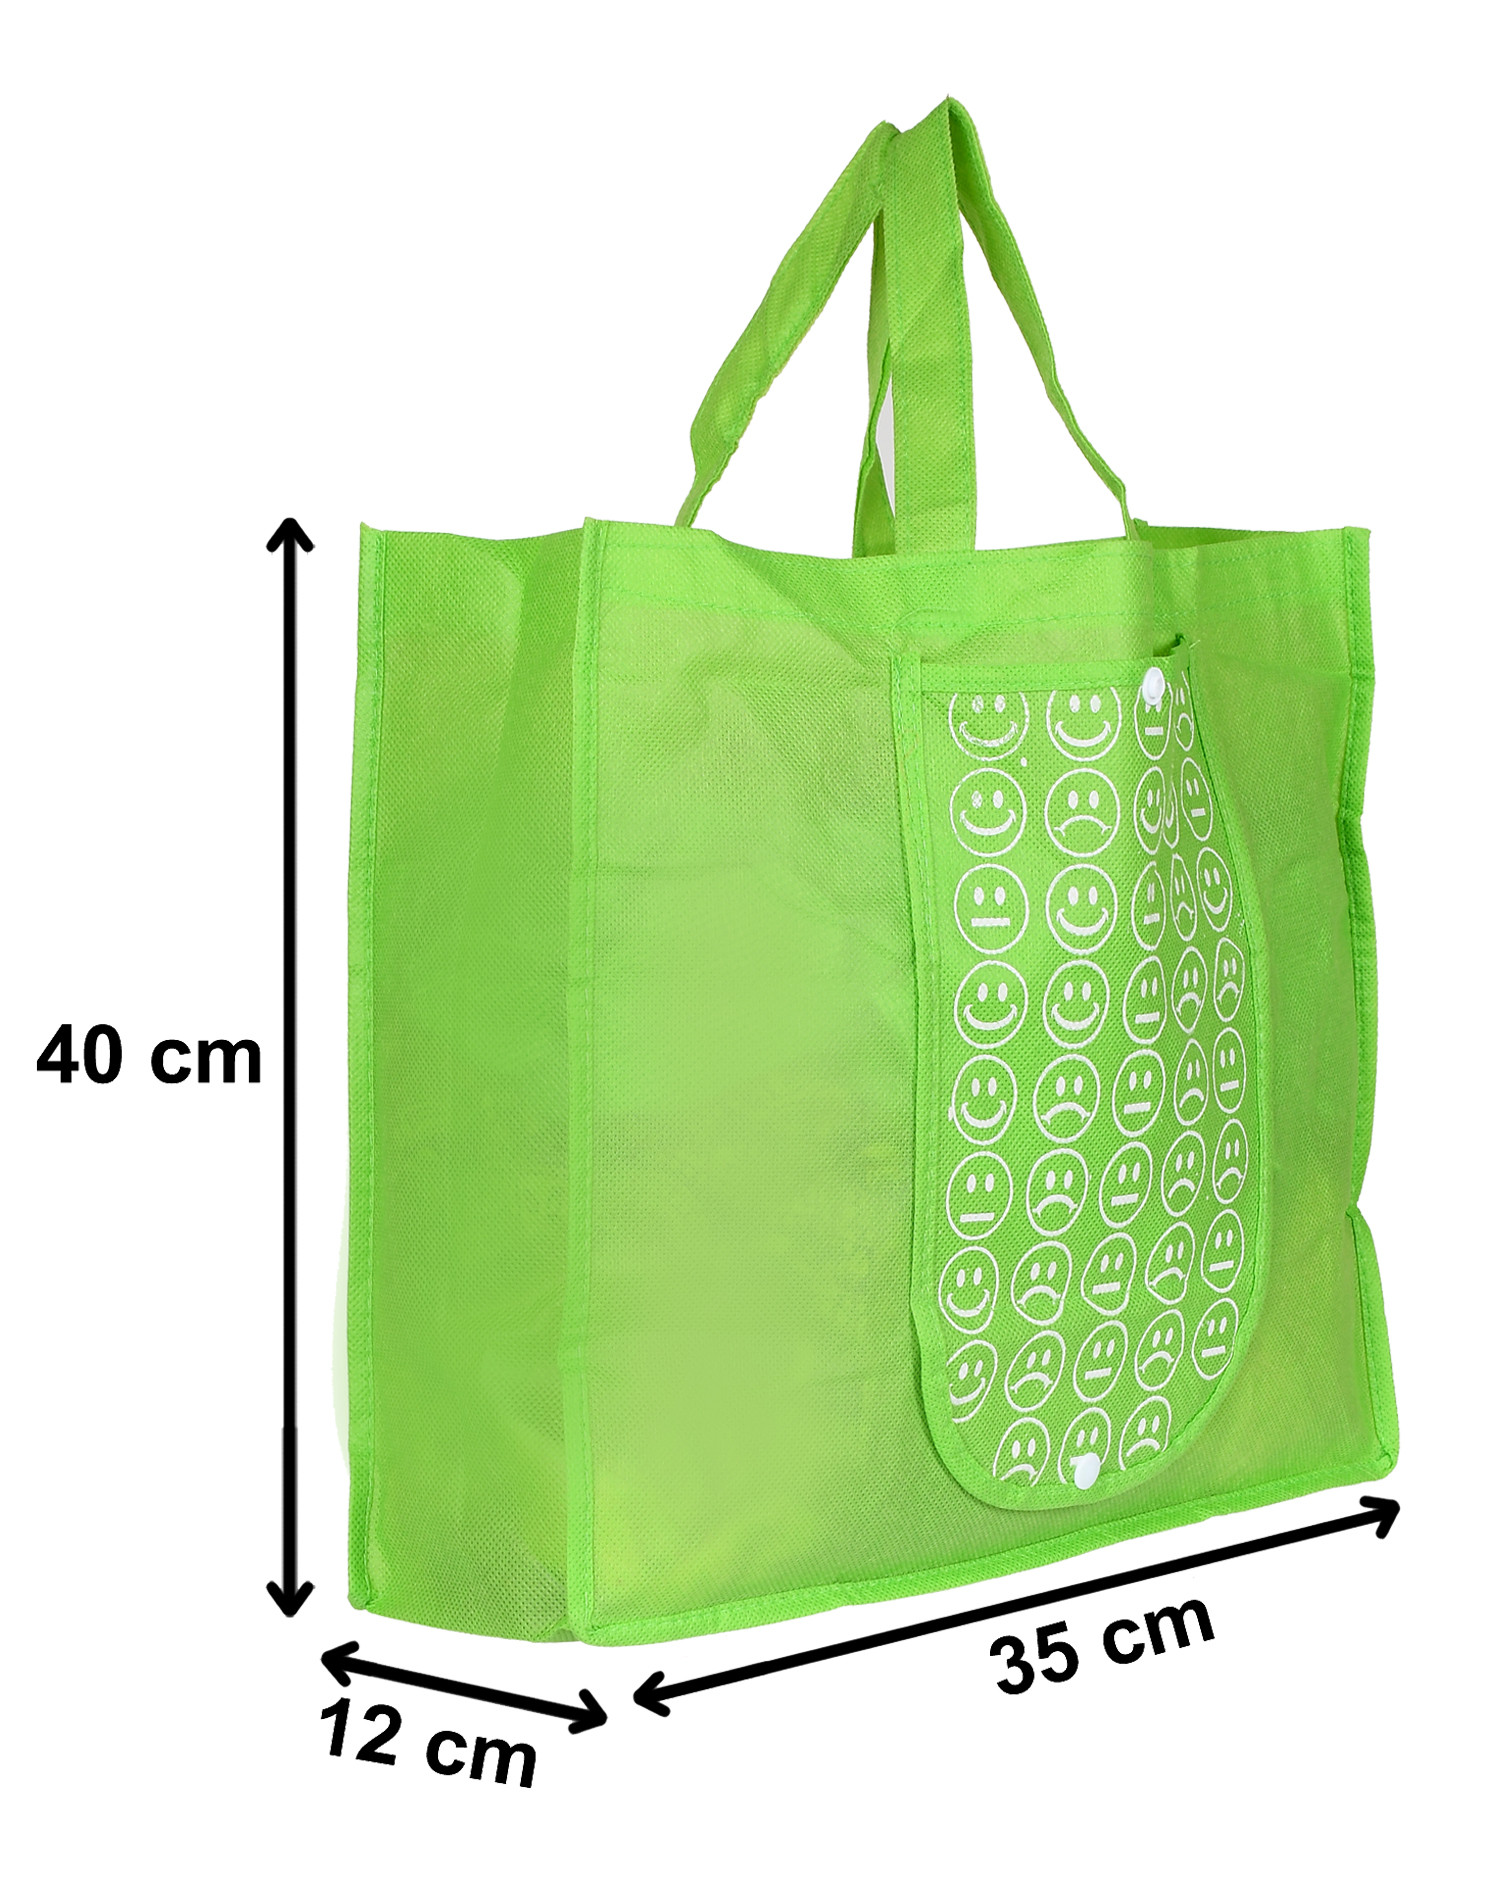 Kuber Industries Shopping Grocery Bags Foldable, Washable Grocery Tote Bag with One Small Pocket, Eco-Friendly Purse Bag Fits in Pocket Waterproof & Lightweight (Green & Pink)